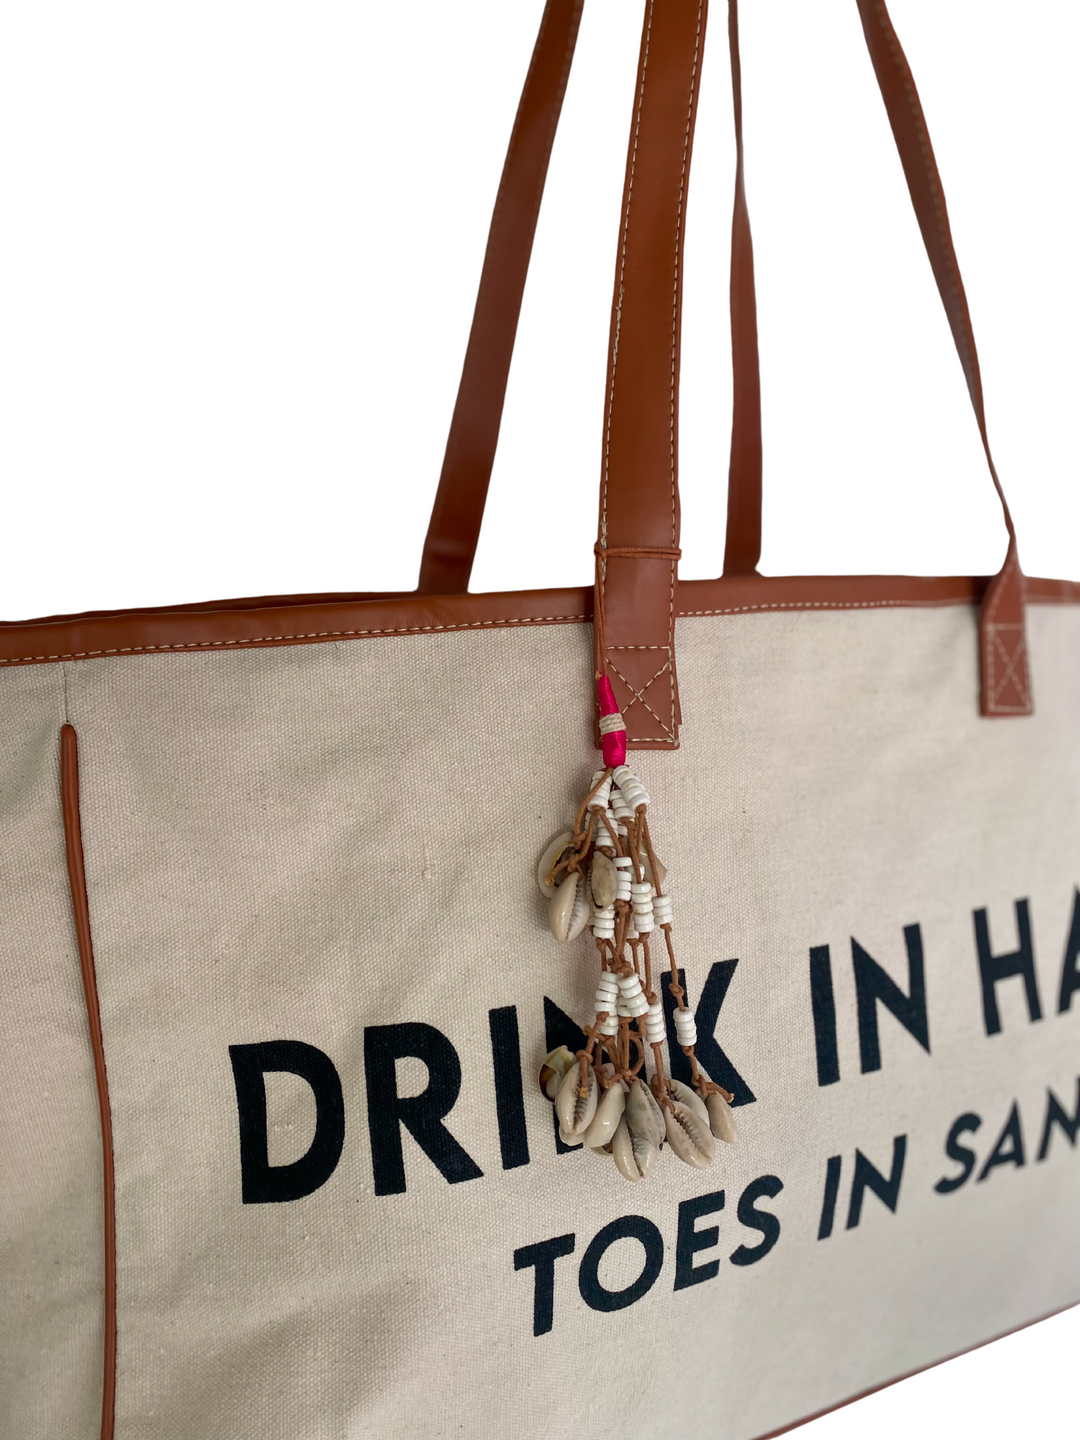 Drink In Hand Tote Bag